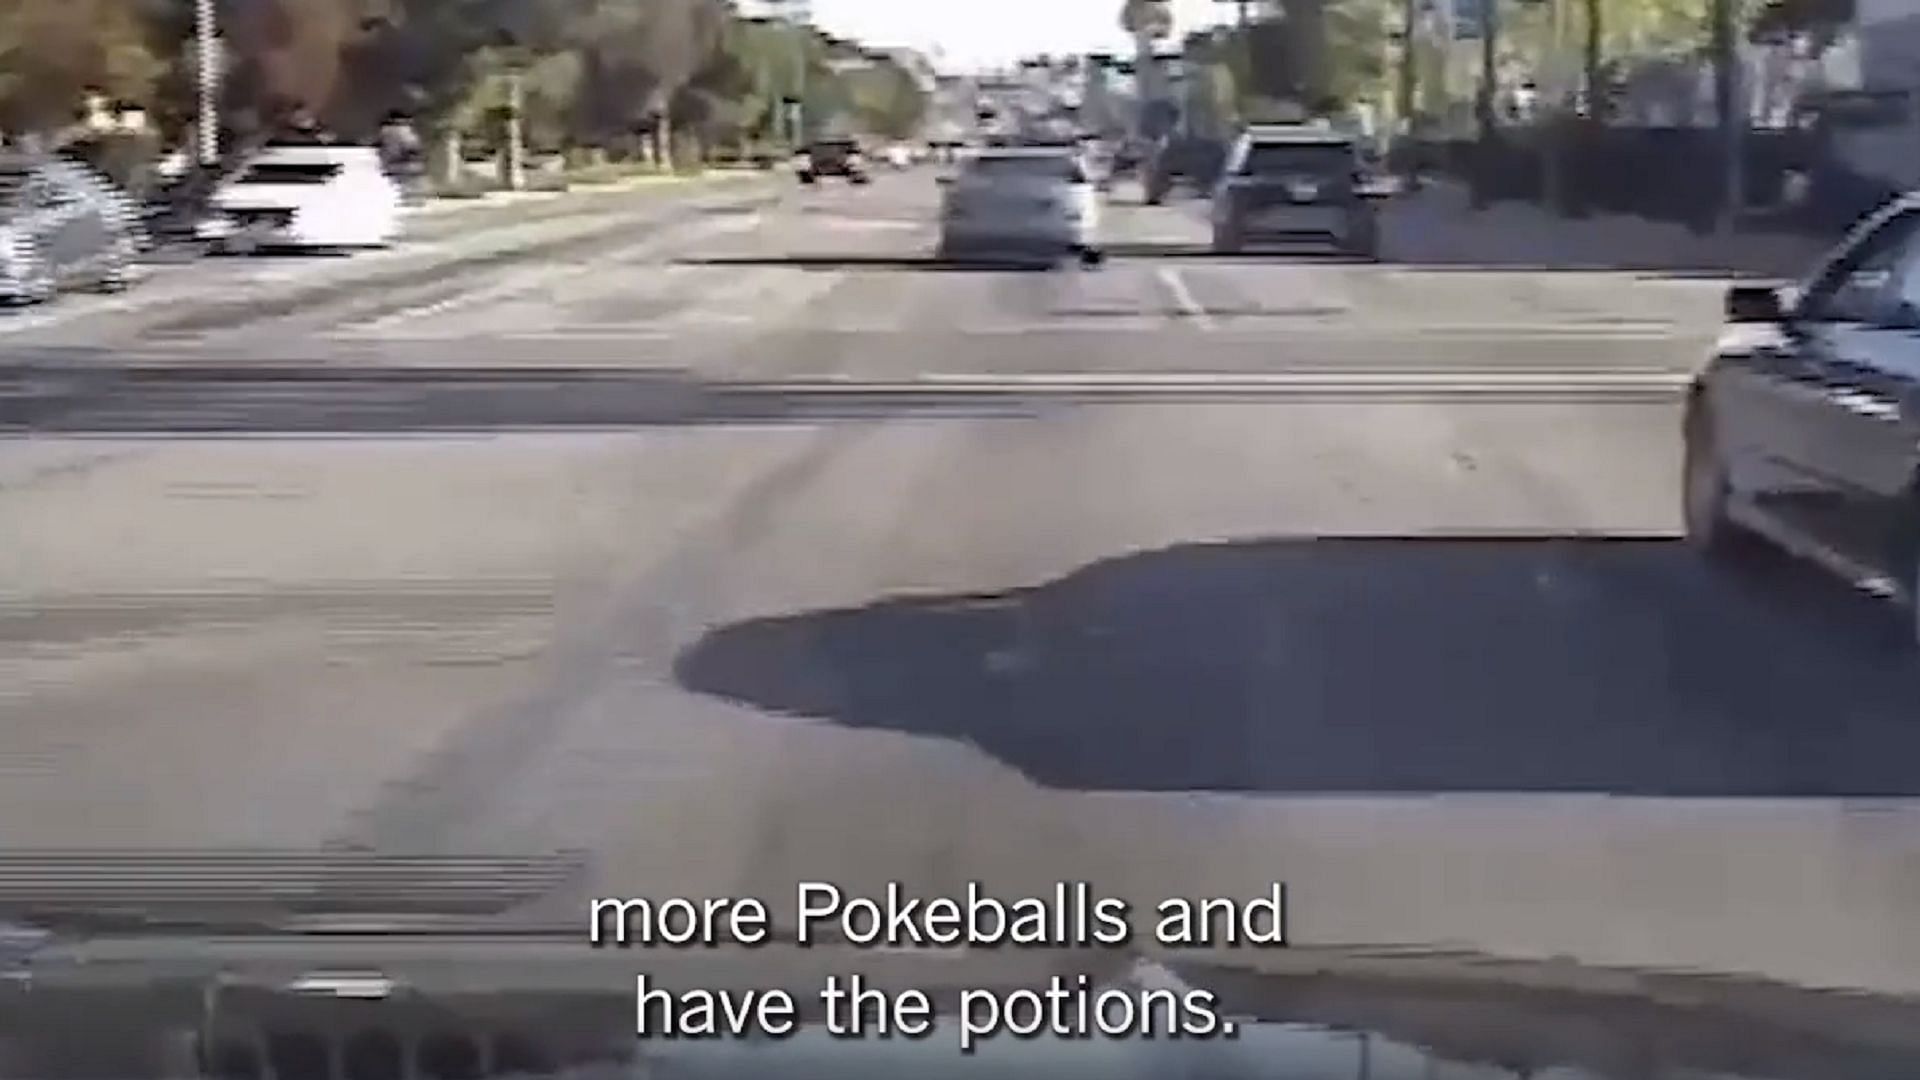 The LAPD officers discuss Pokemon GO in newly-released dashcam footage (Image via Los Angeles Police Department)